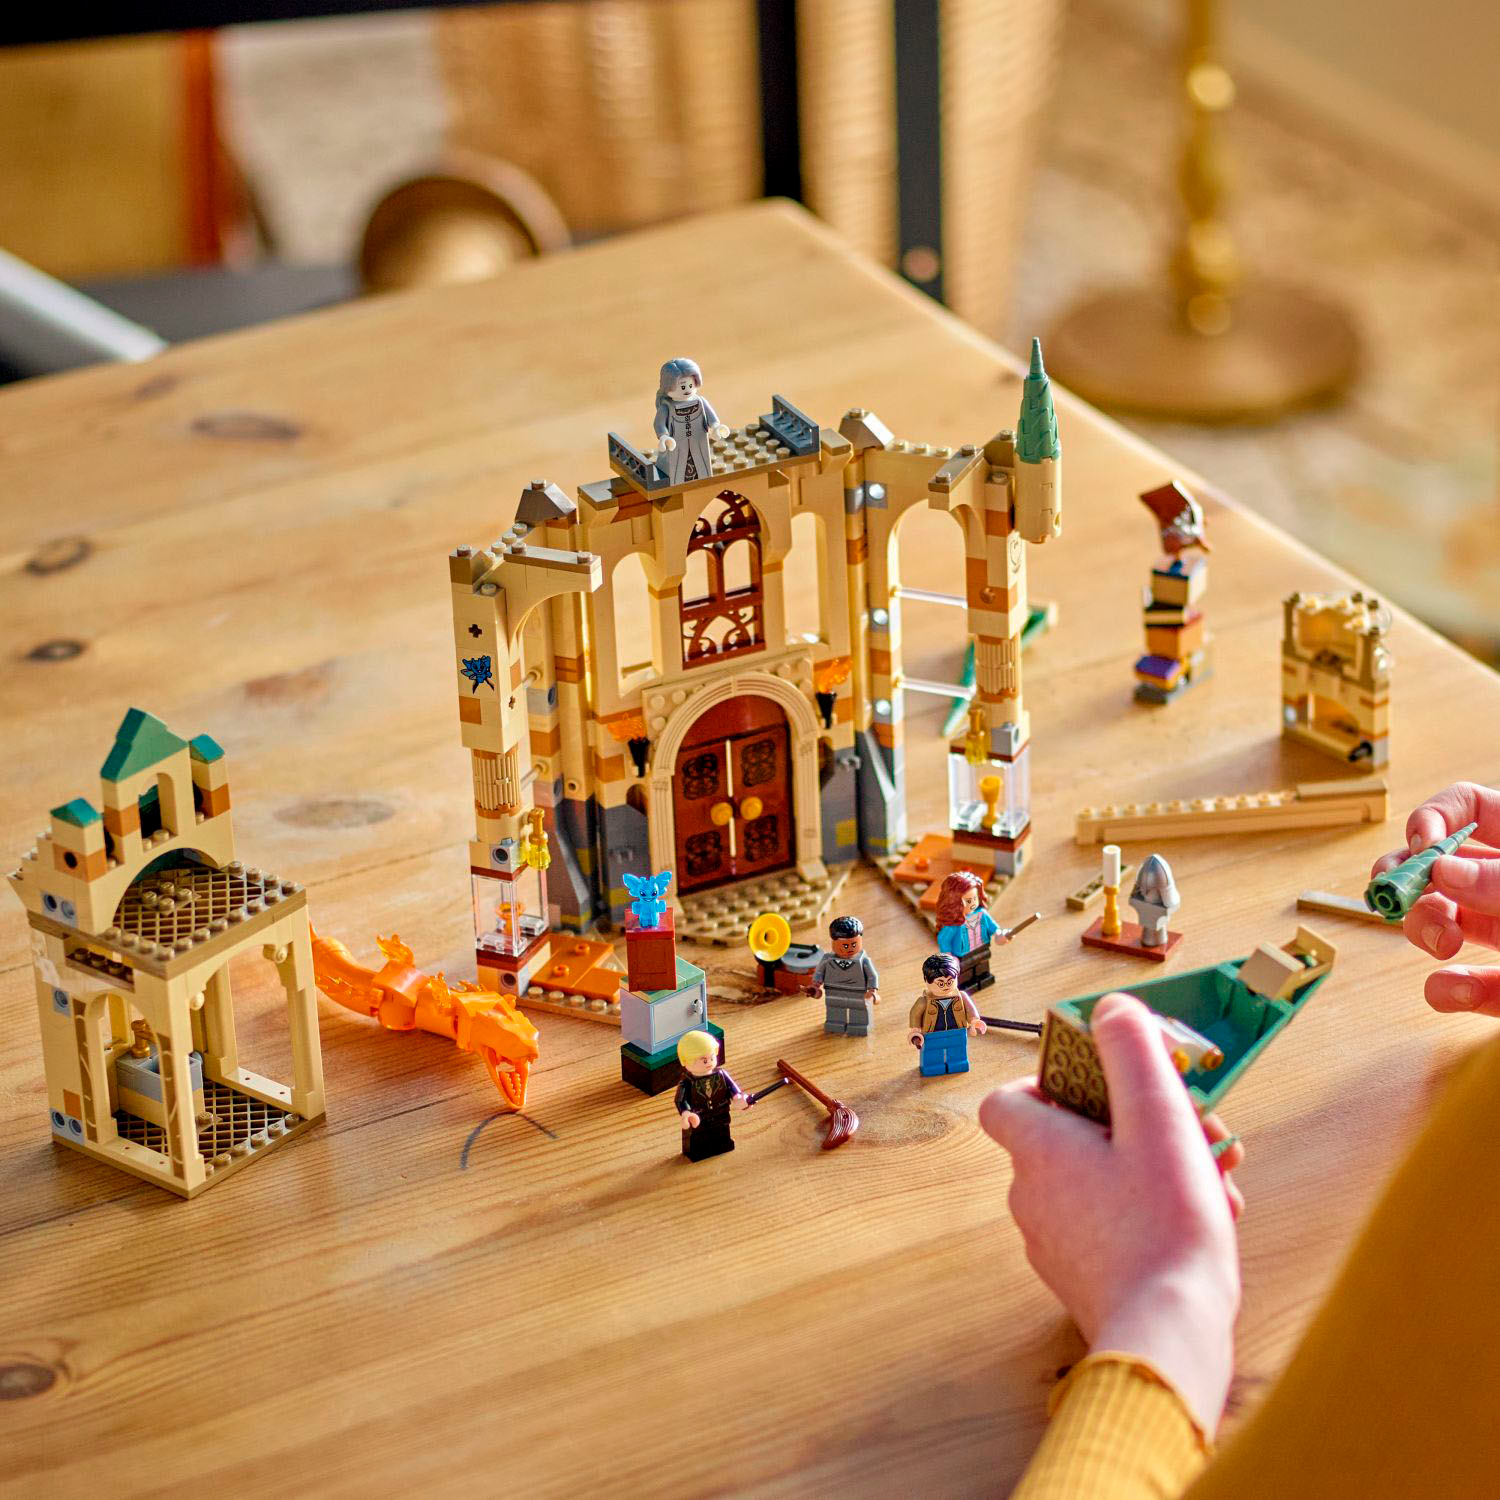 LEGO's New Harry Potter Hogwarts Castle Is A Laborious But